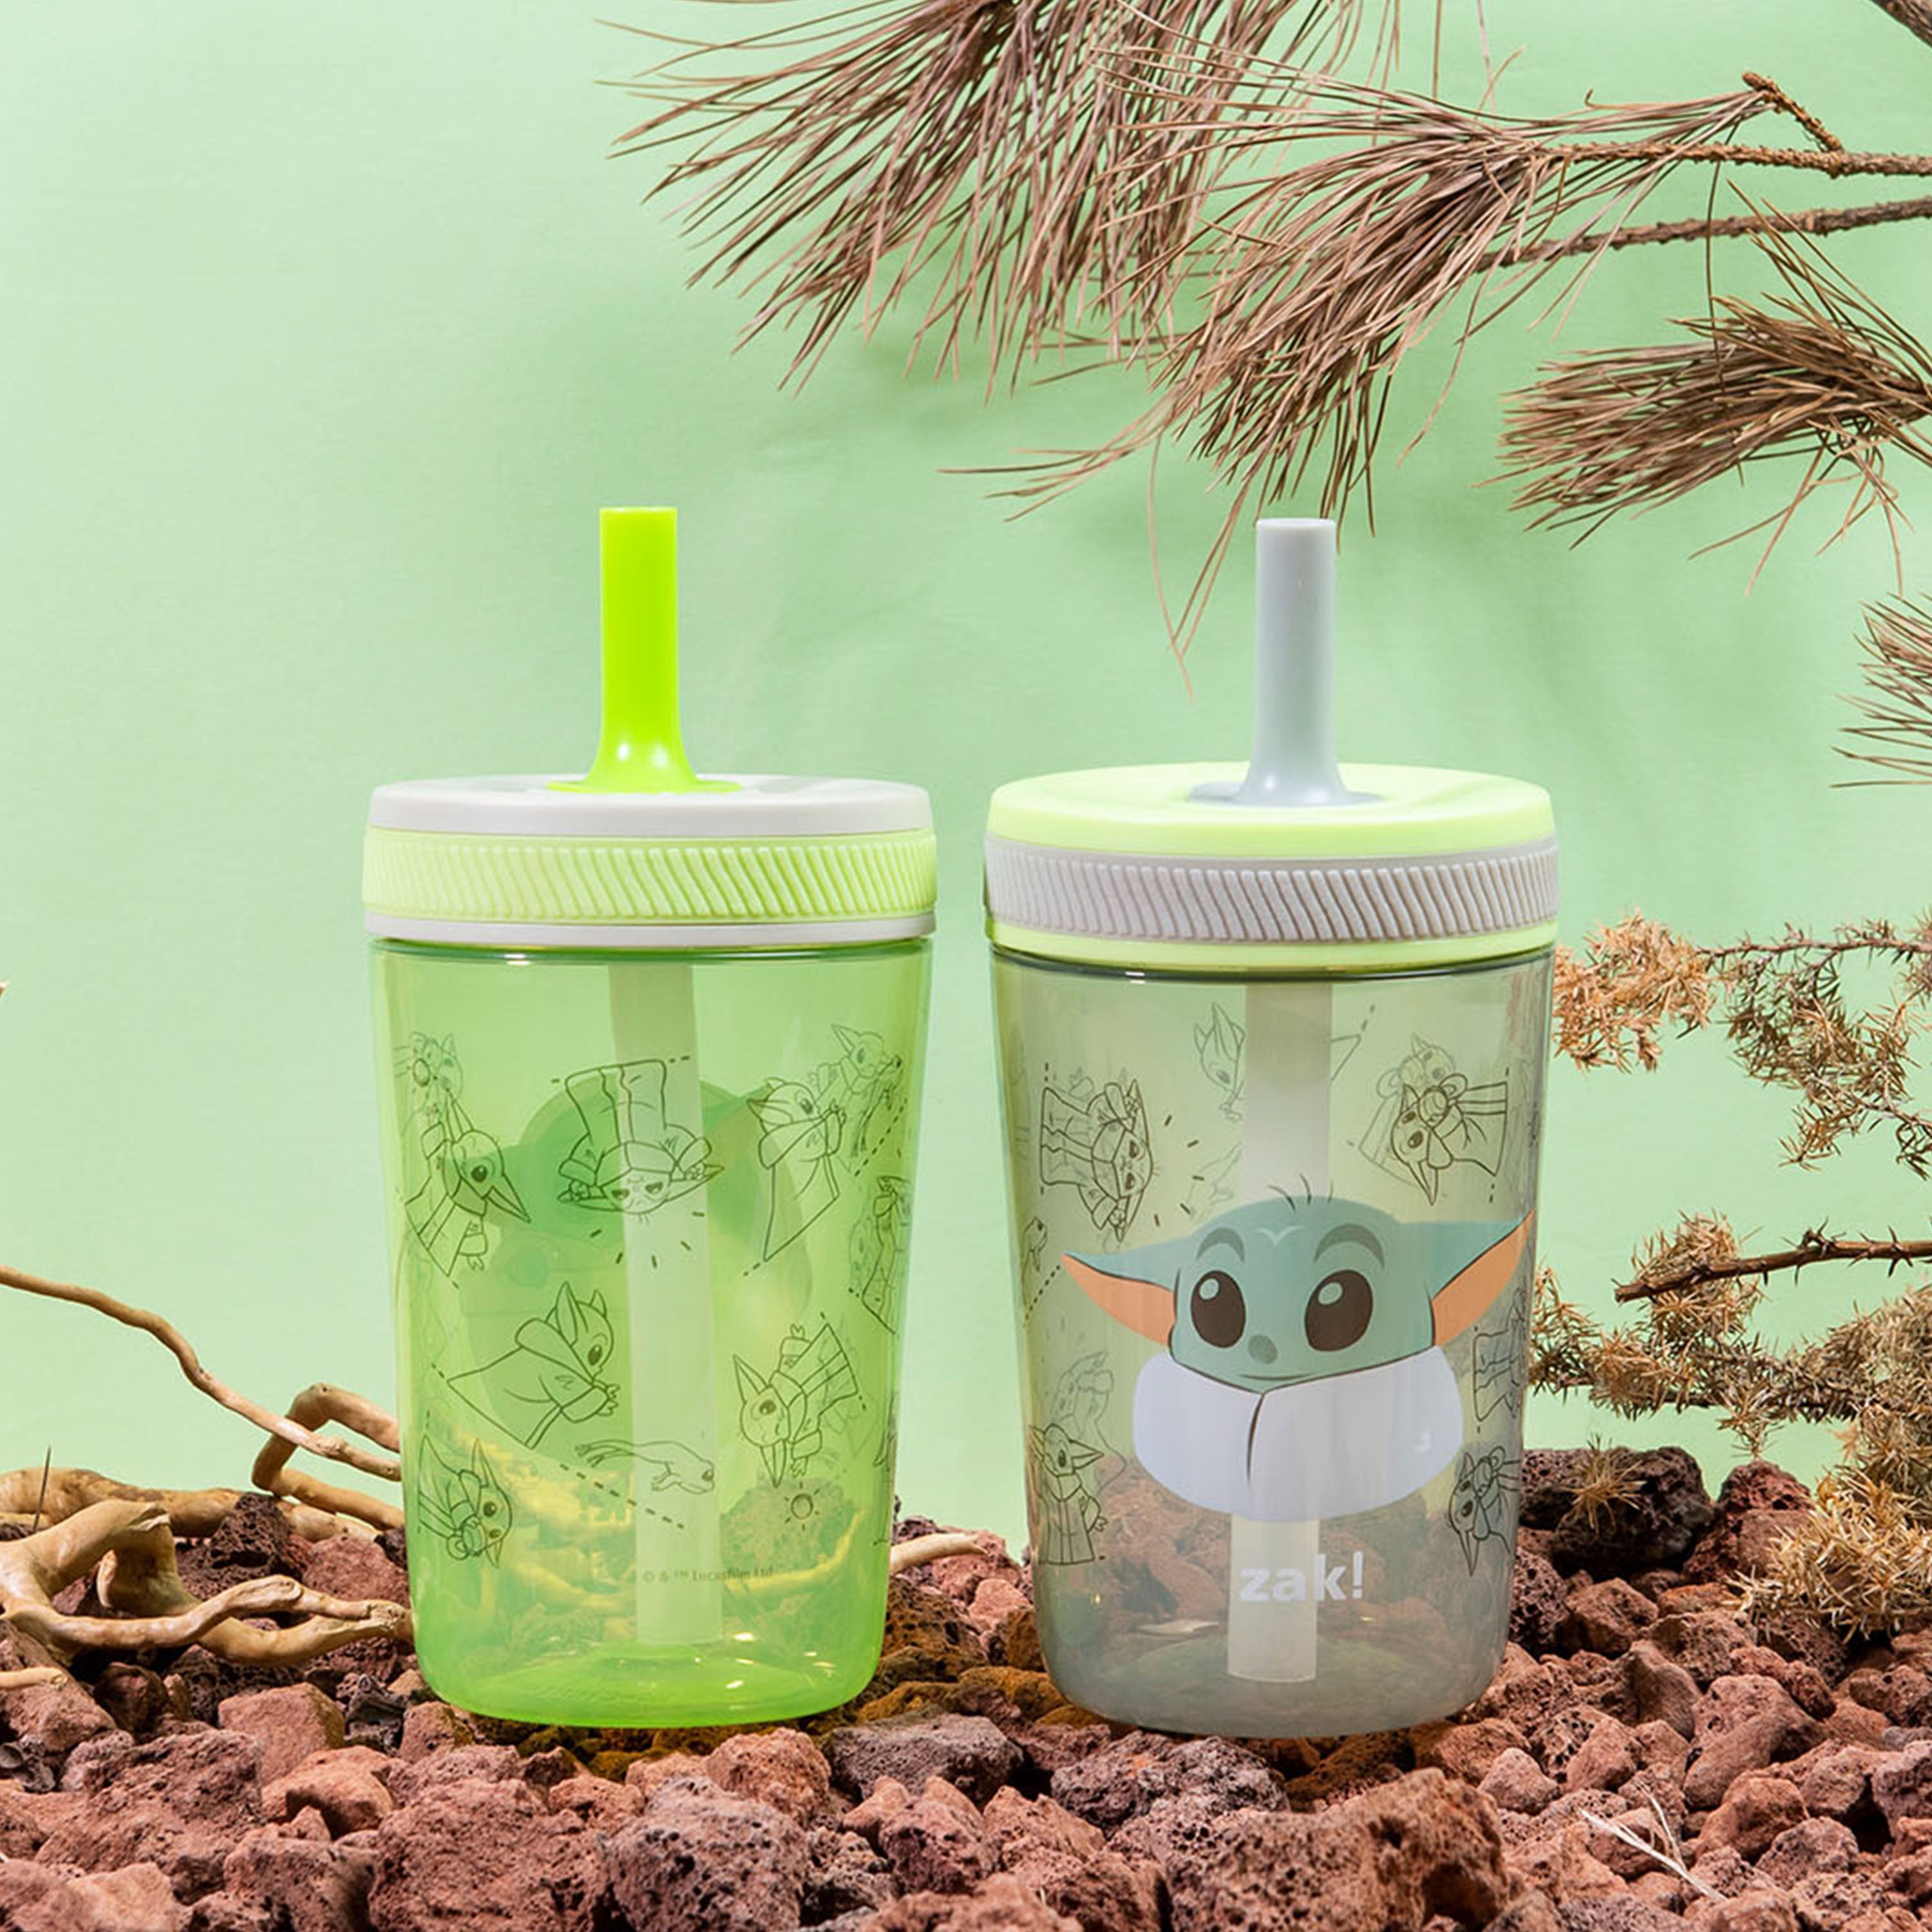 Zak Designs Kelso Tumbler Set 15 oz, ( Unicorn ) Non-BPA Leak-Proof Screw-On Lid with Straw Made of Durable Plastic and Silicone, Perfect Baby Cup